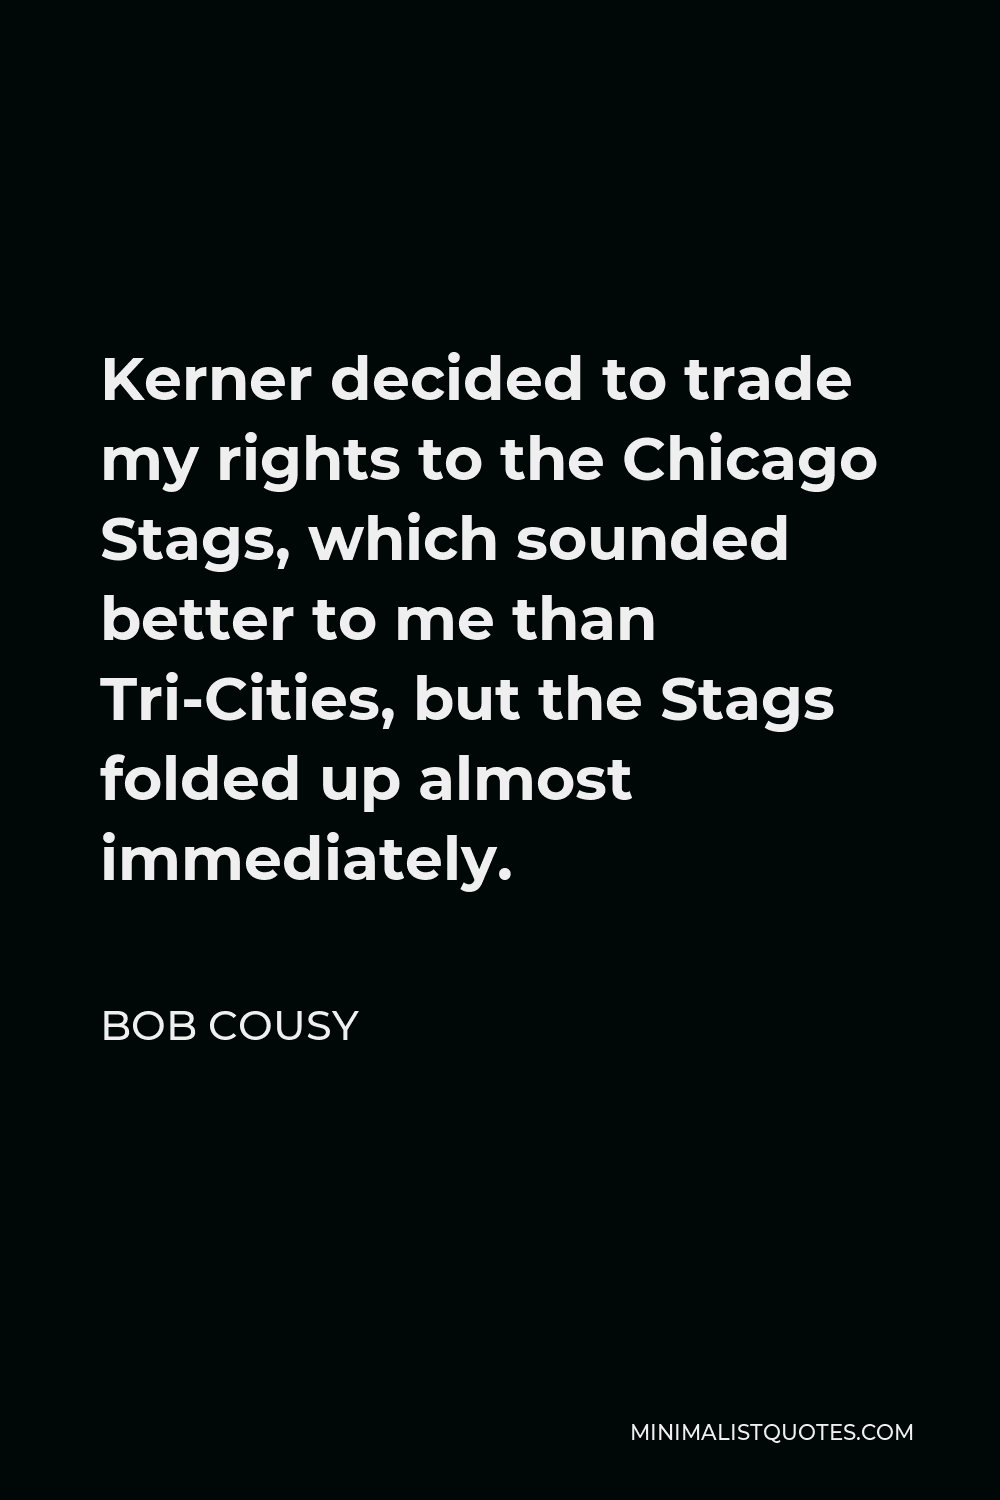 Bob Cousy Quote - Kerner decided to trade my rights to the Chicago Stags, which sounded better to me than Tri-Cities, but the Stags folded up almost immediately.